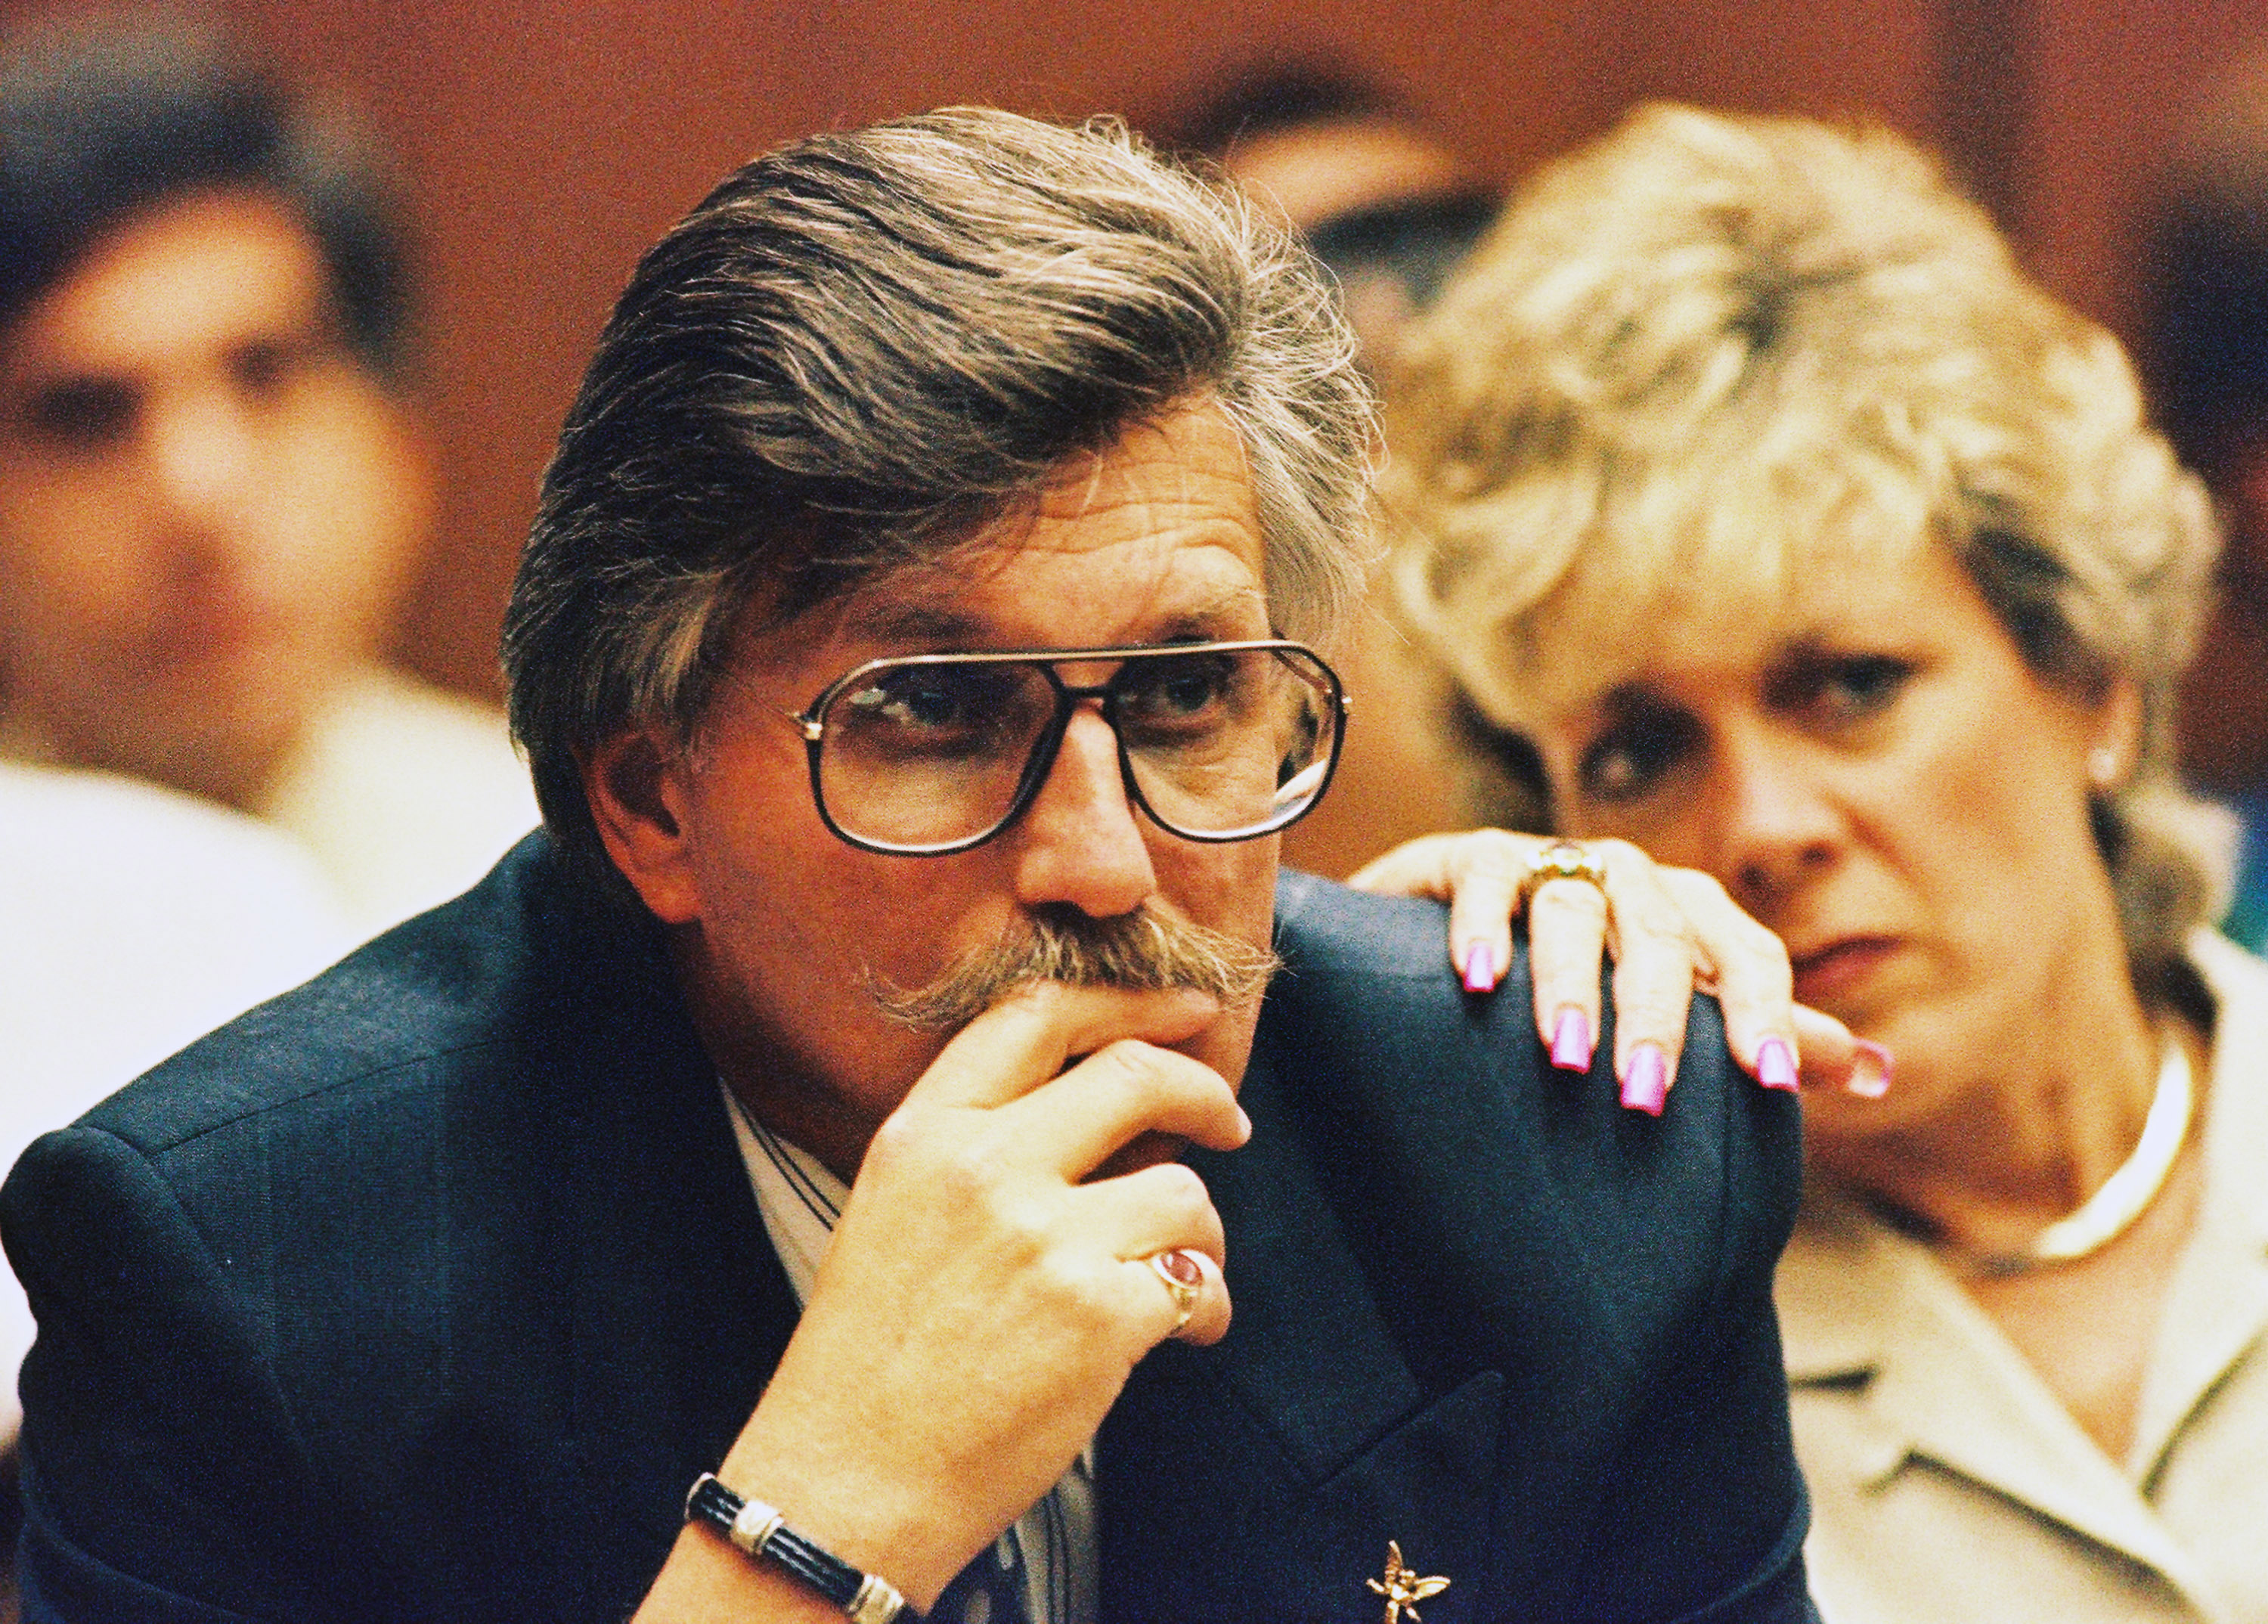 Ron Goldman’s father reacts to O.J. Simpson’s death